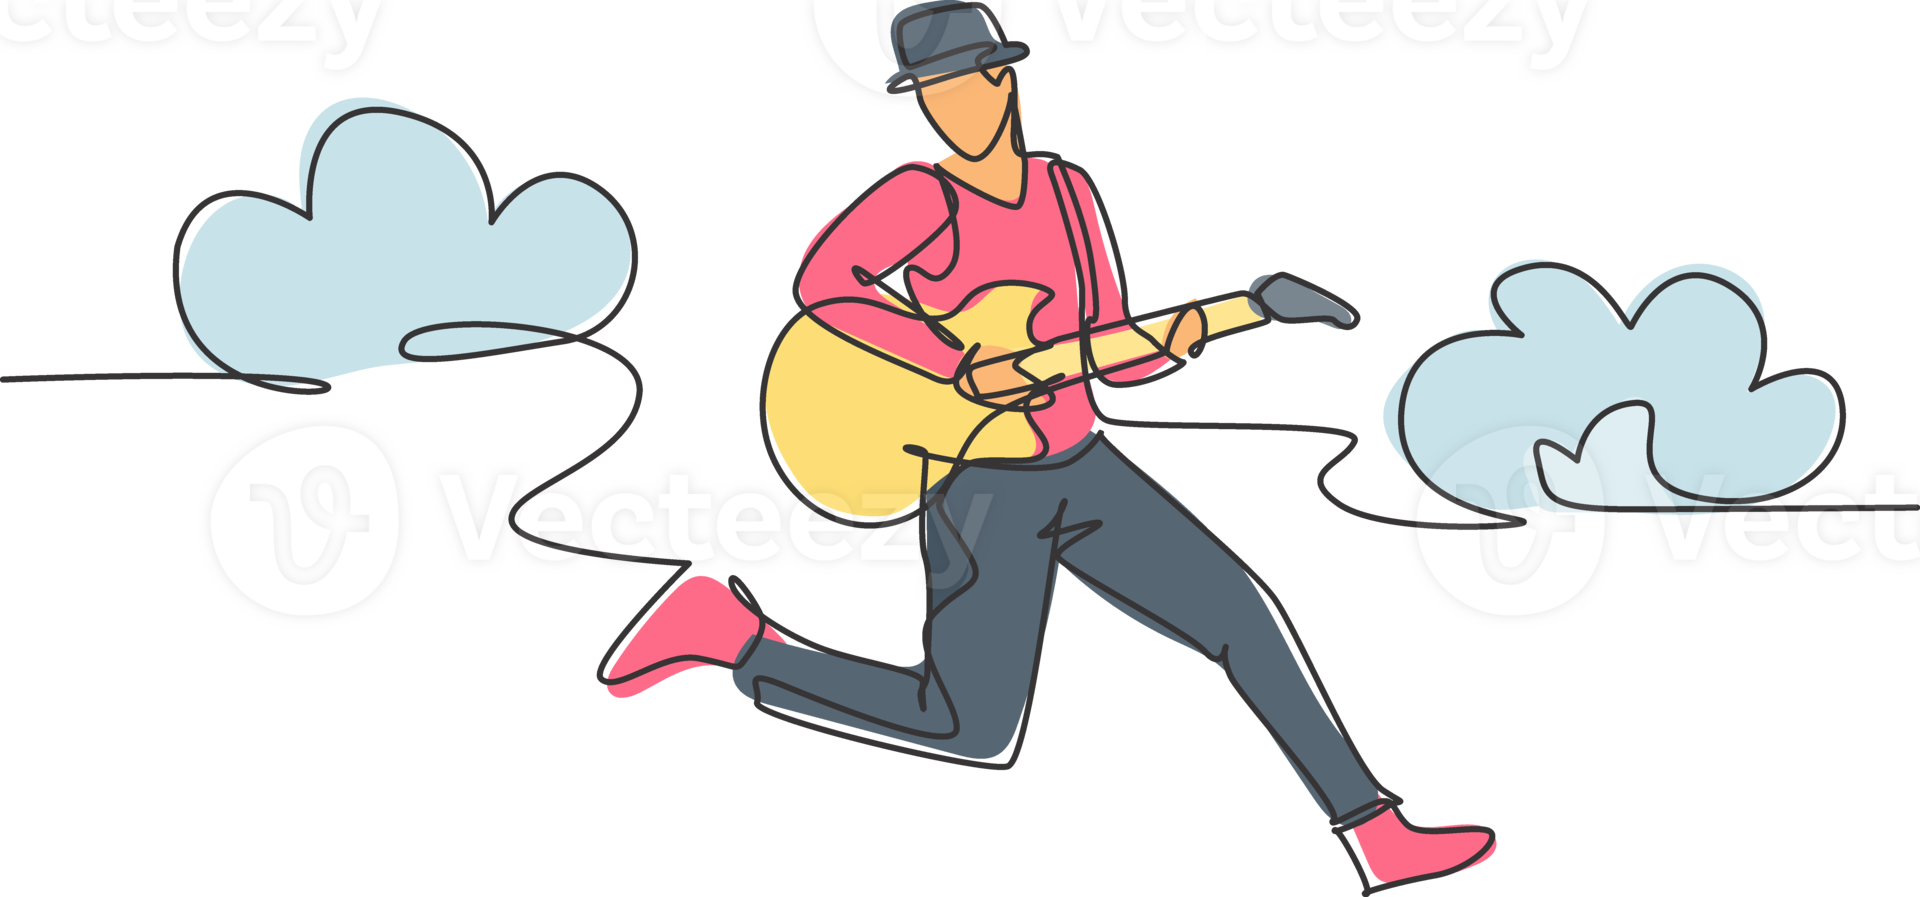 Single line drawing of young energetic guitarist jumping at stage and playing his electric guitar. Energetic musician artist performance concept. Continuous line draw design illustration png